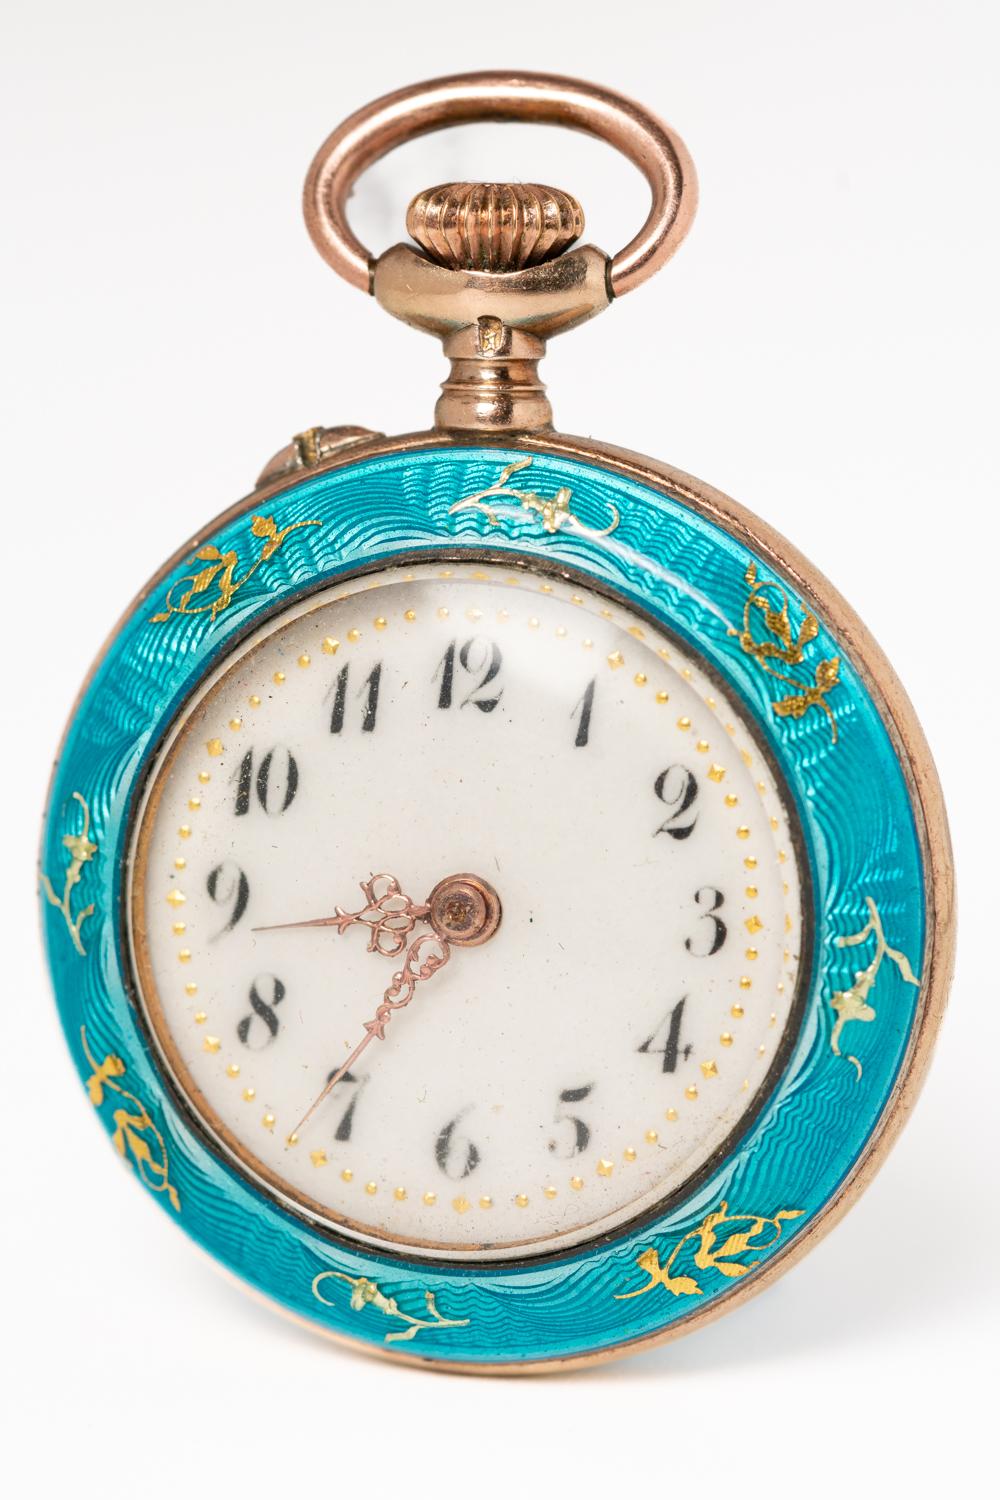 Antique Swiss Silver and Turquoise Guilloche Enamel Fauvette HAD Pocket Watch  In Excellent Condition For Sale In Portland, GB